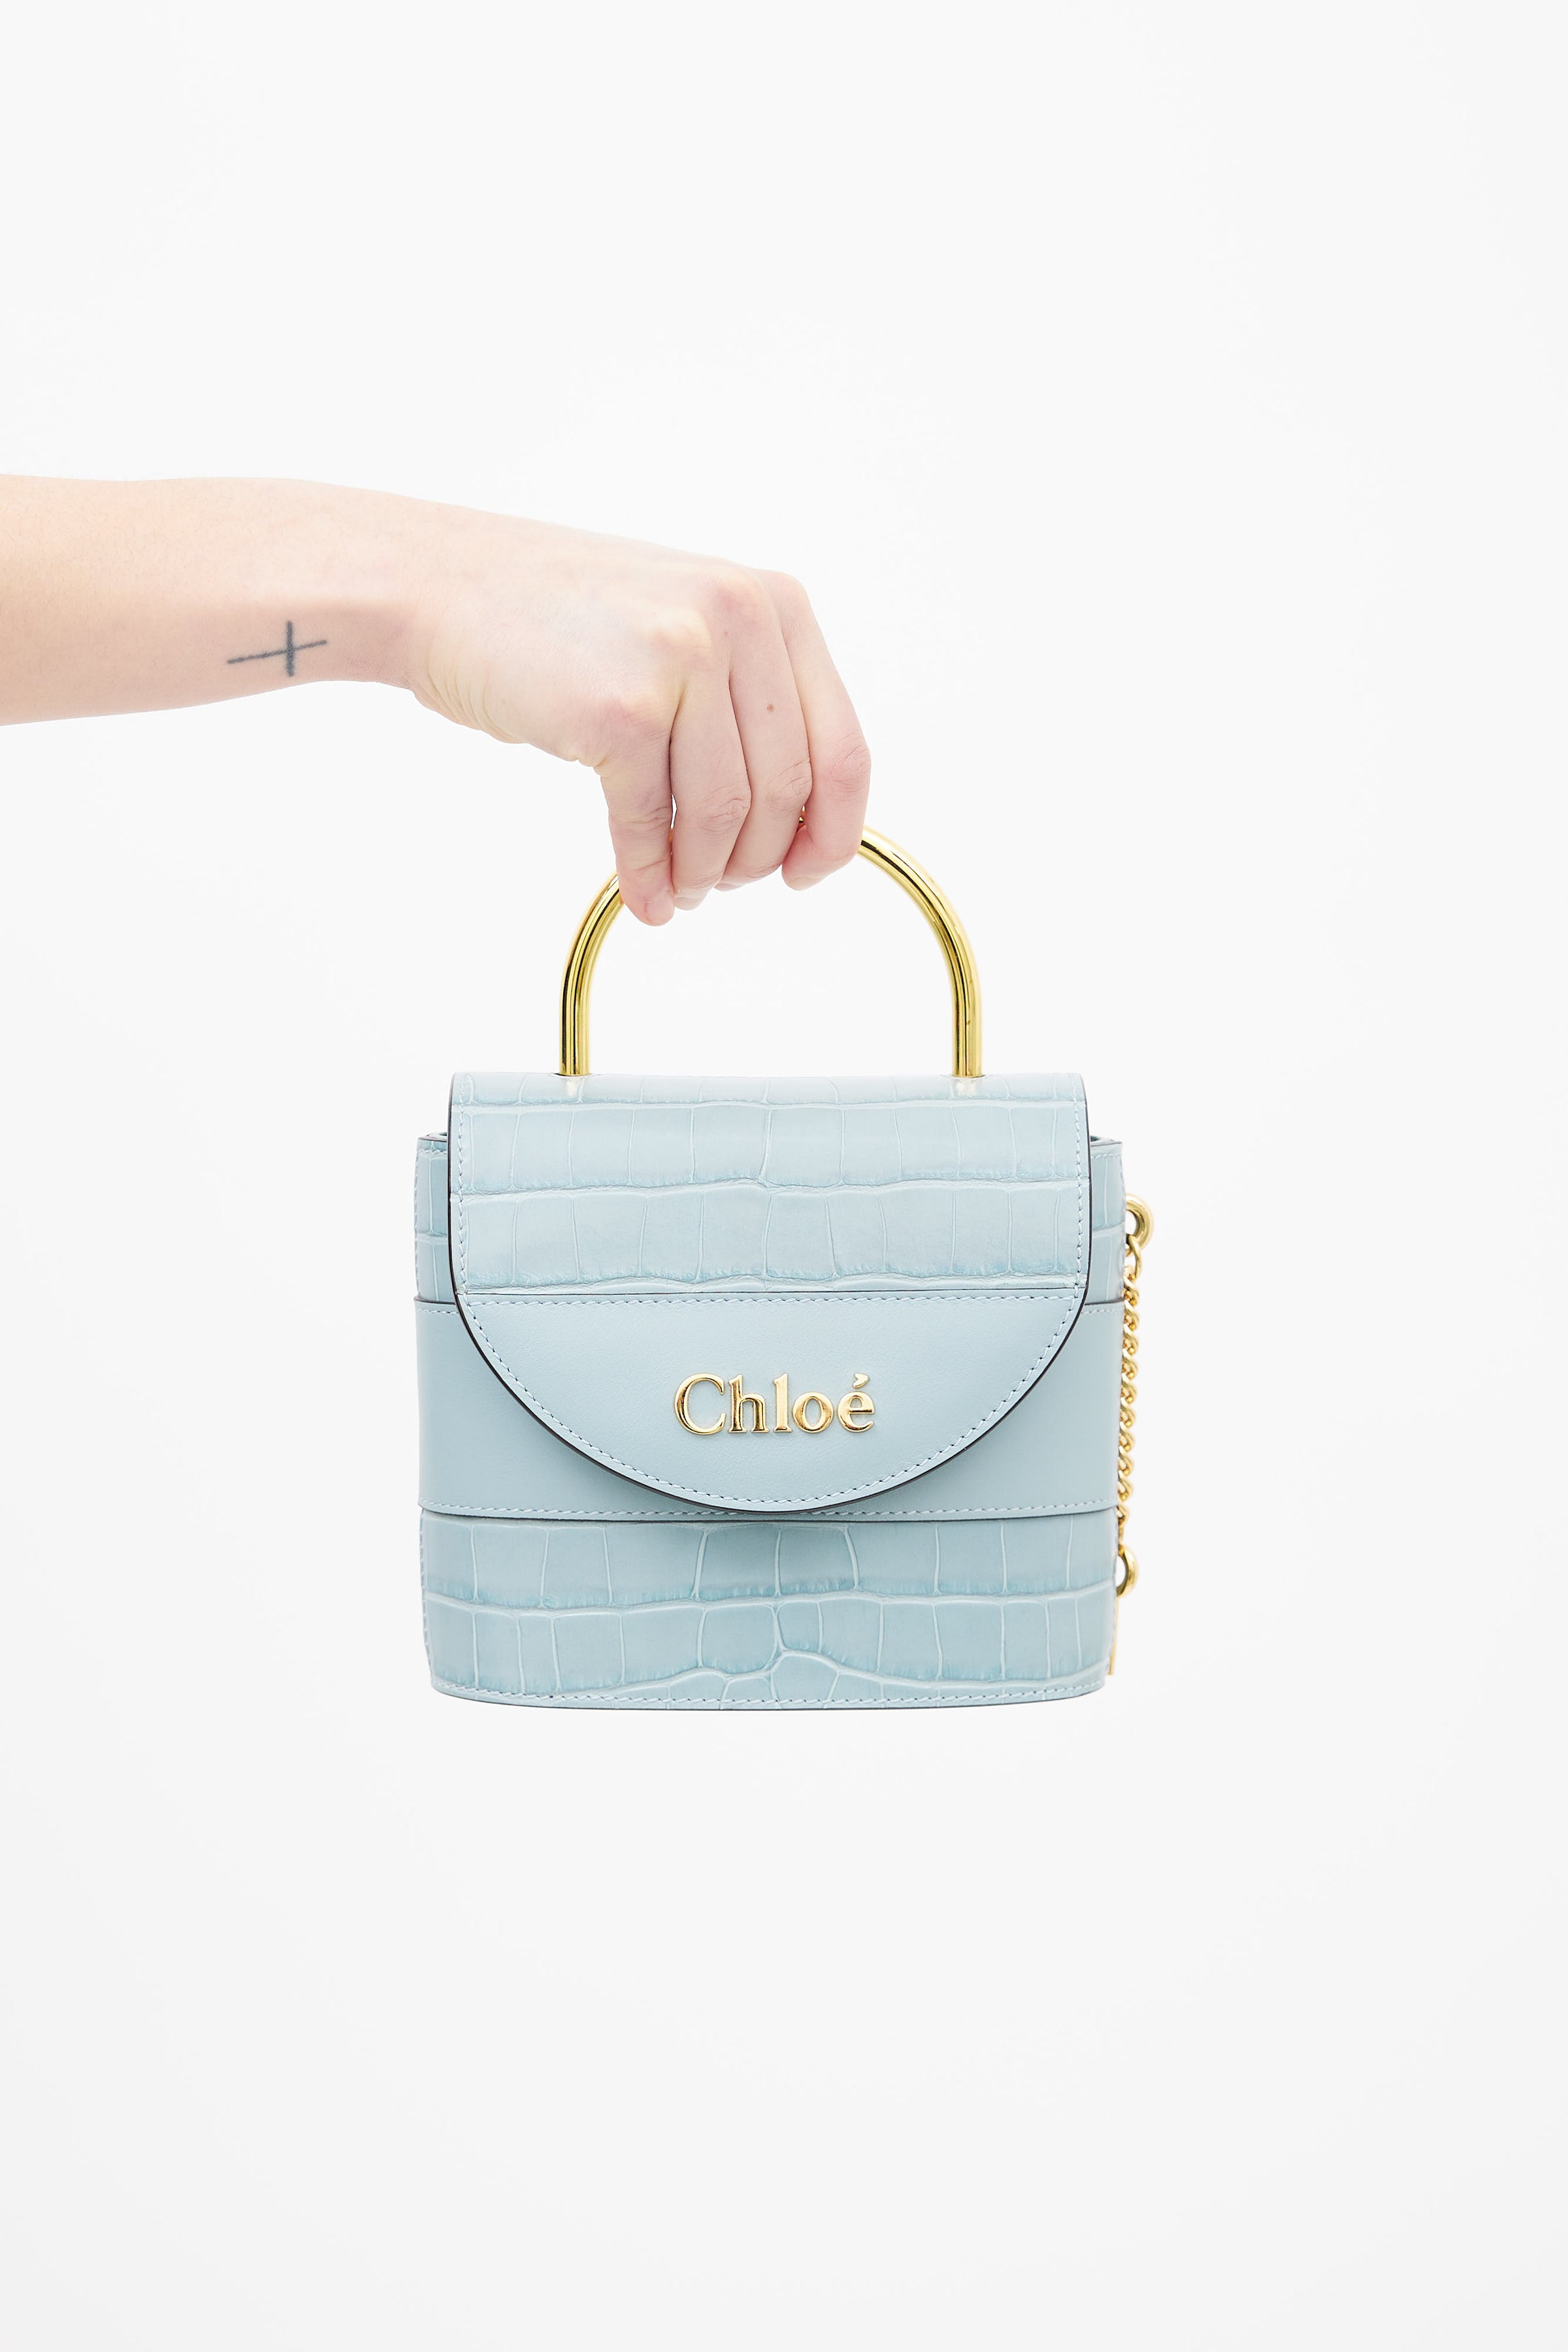 Chloe Aby Lock Bag Crocodile Embossed Leather Small Blue